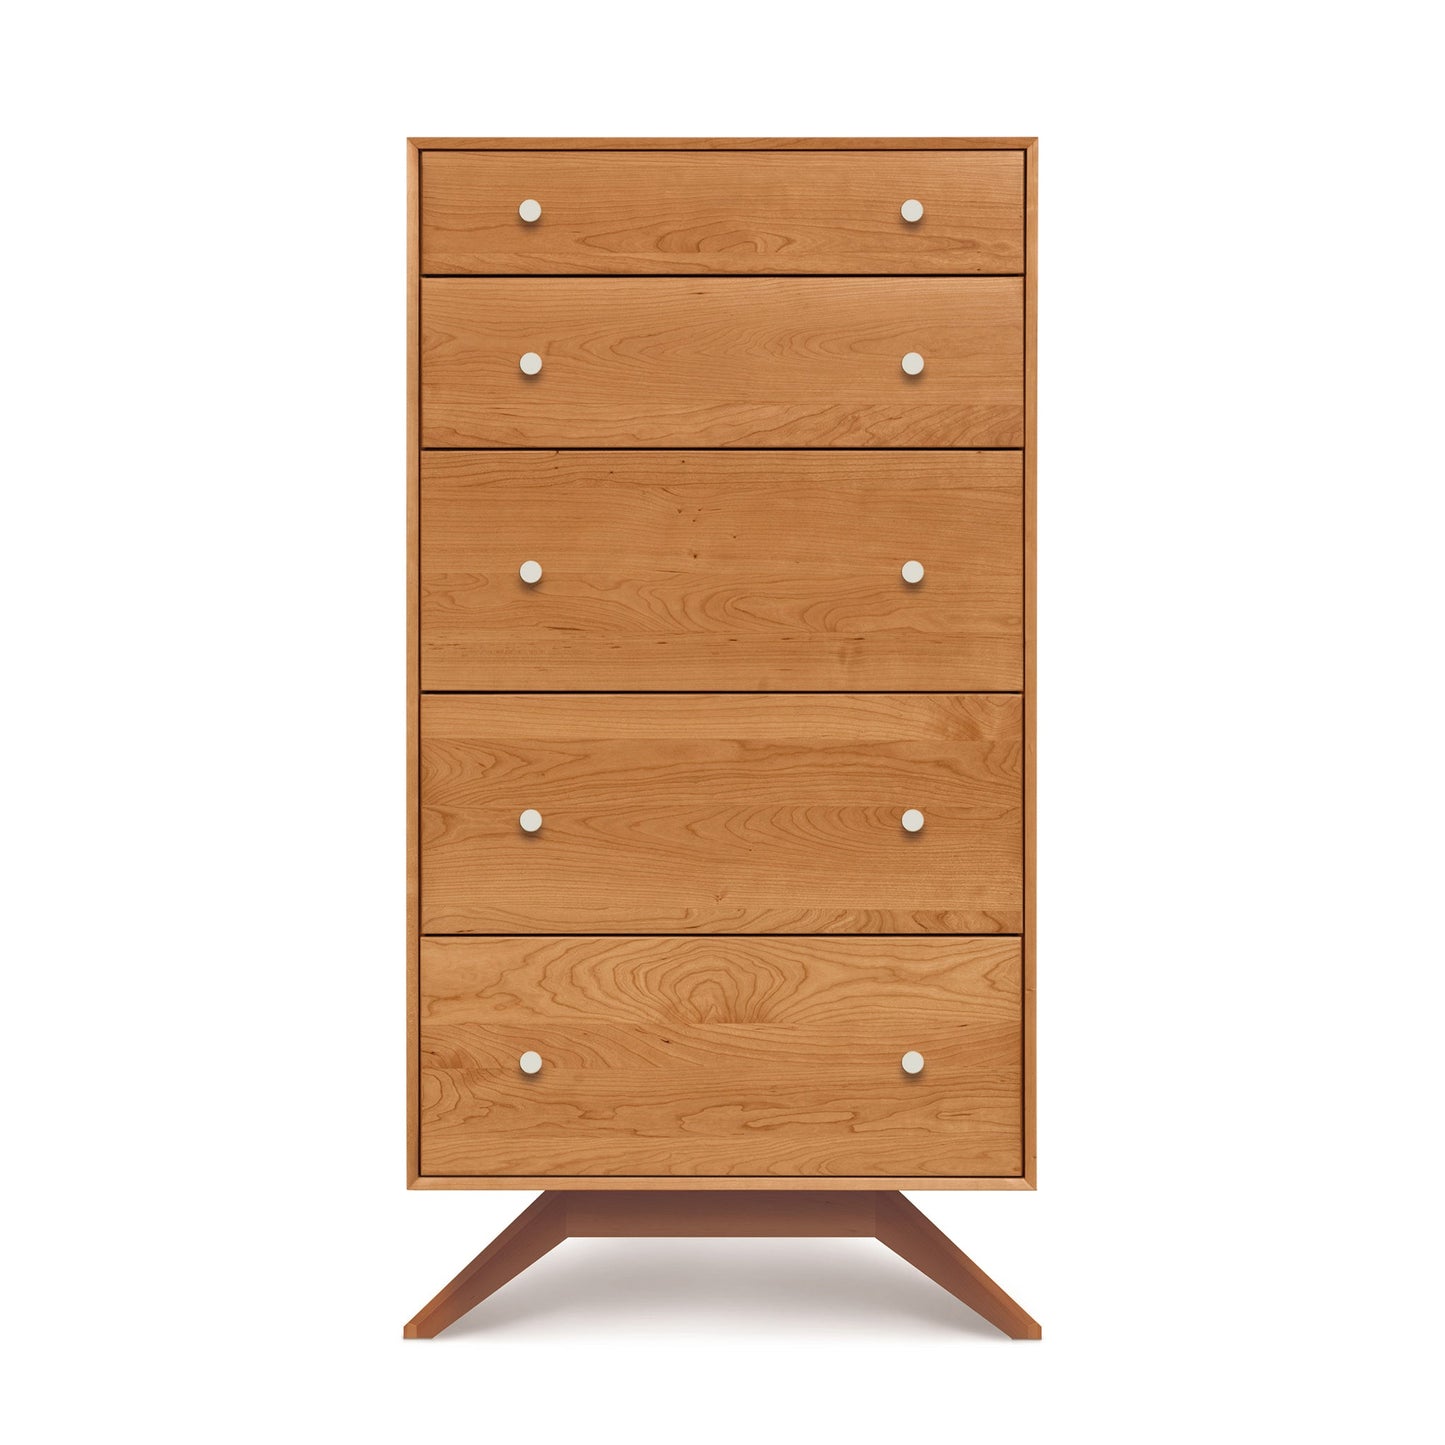 A wooden chest of drawers on a white background.